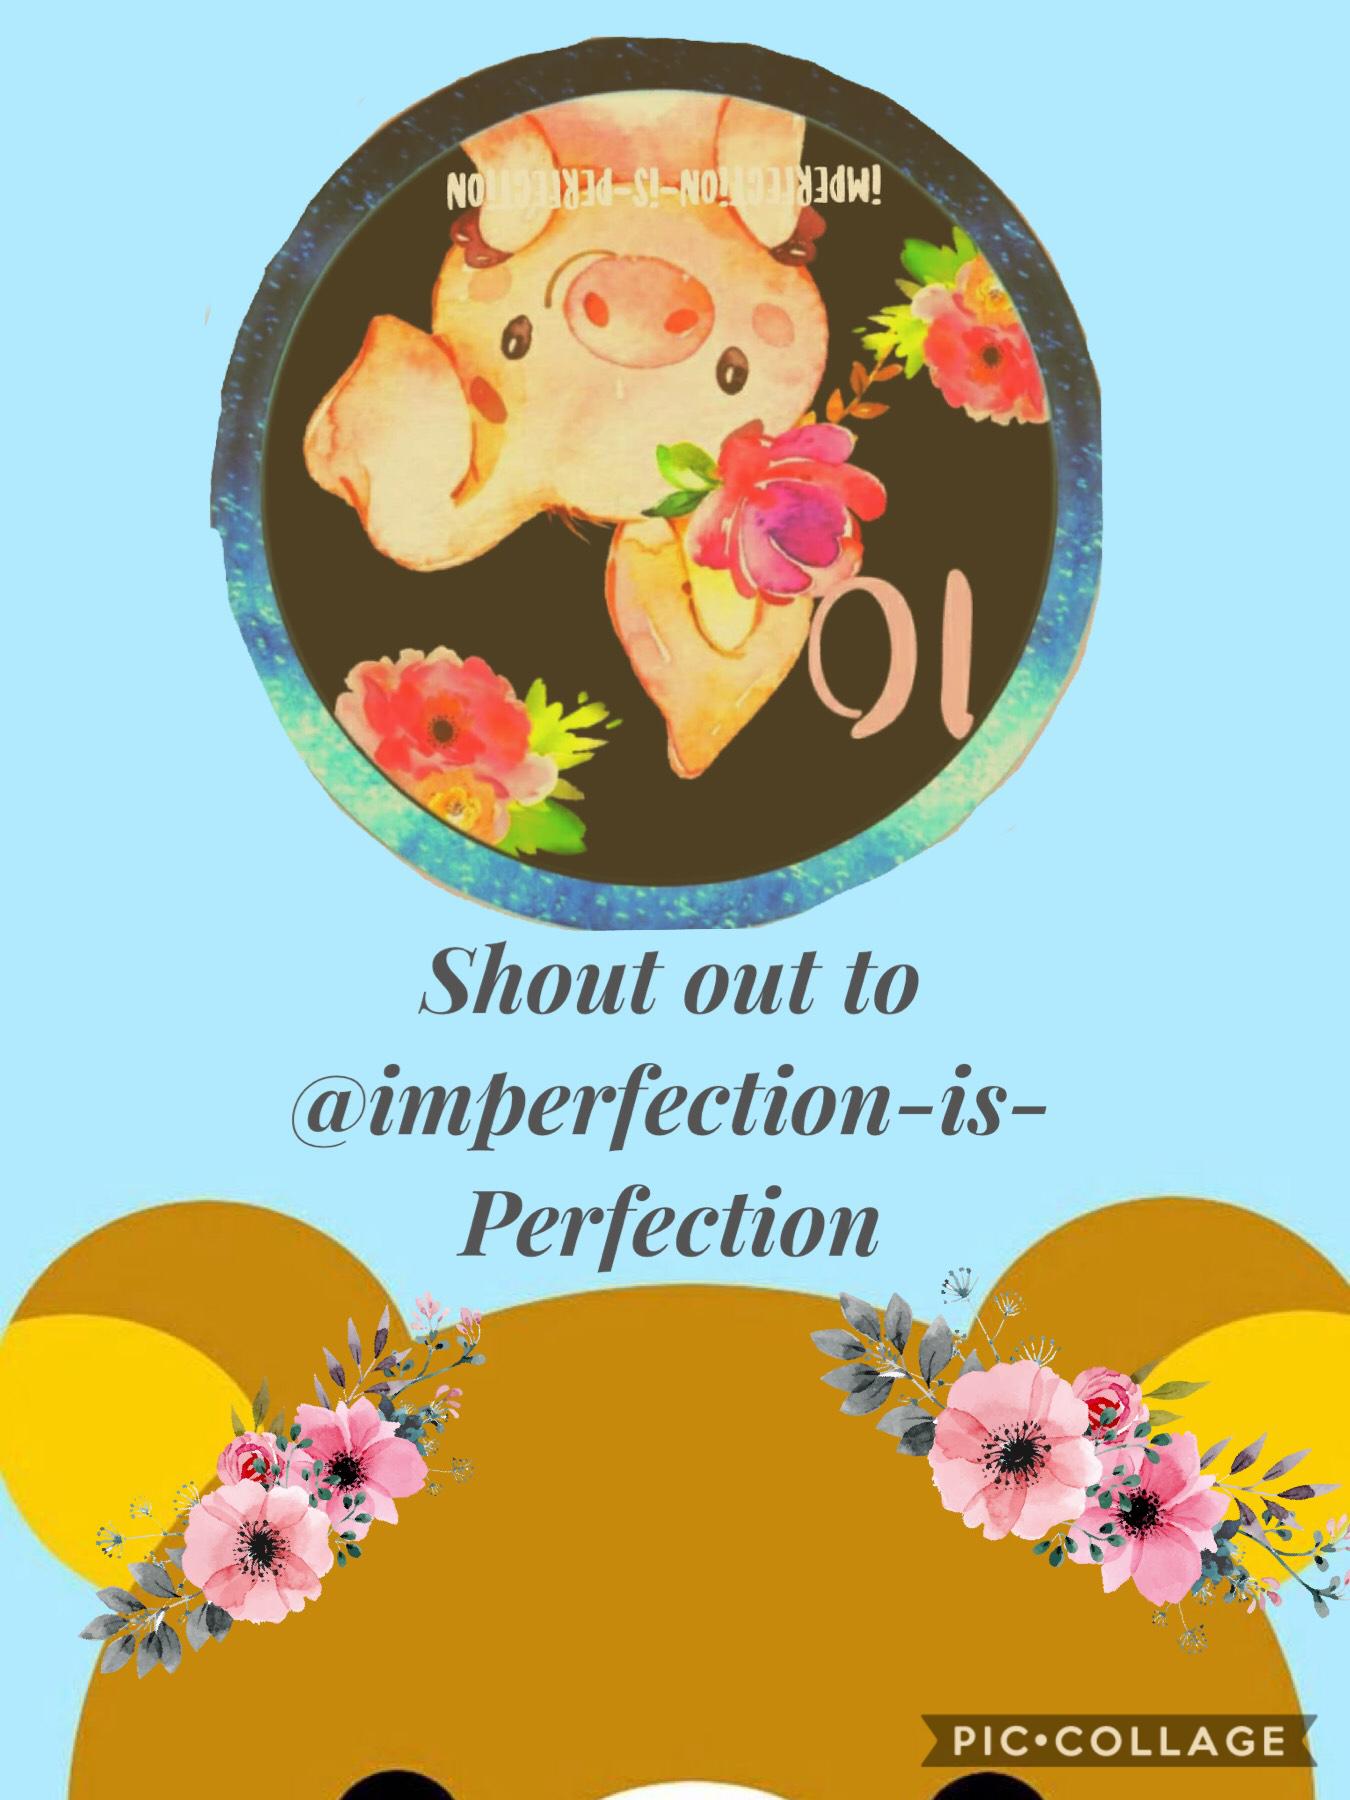 Bear of the week 1/11/2019 
Congrats @imperfect-is-perfection!